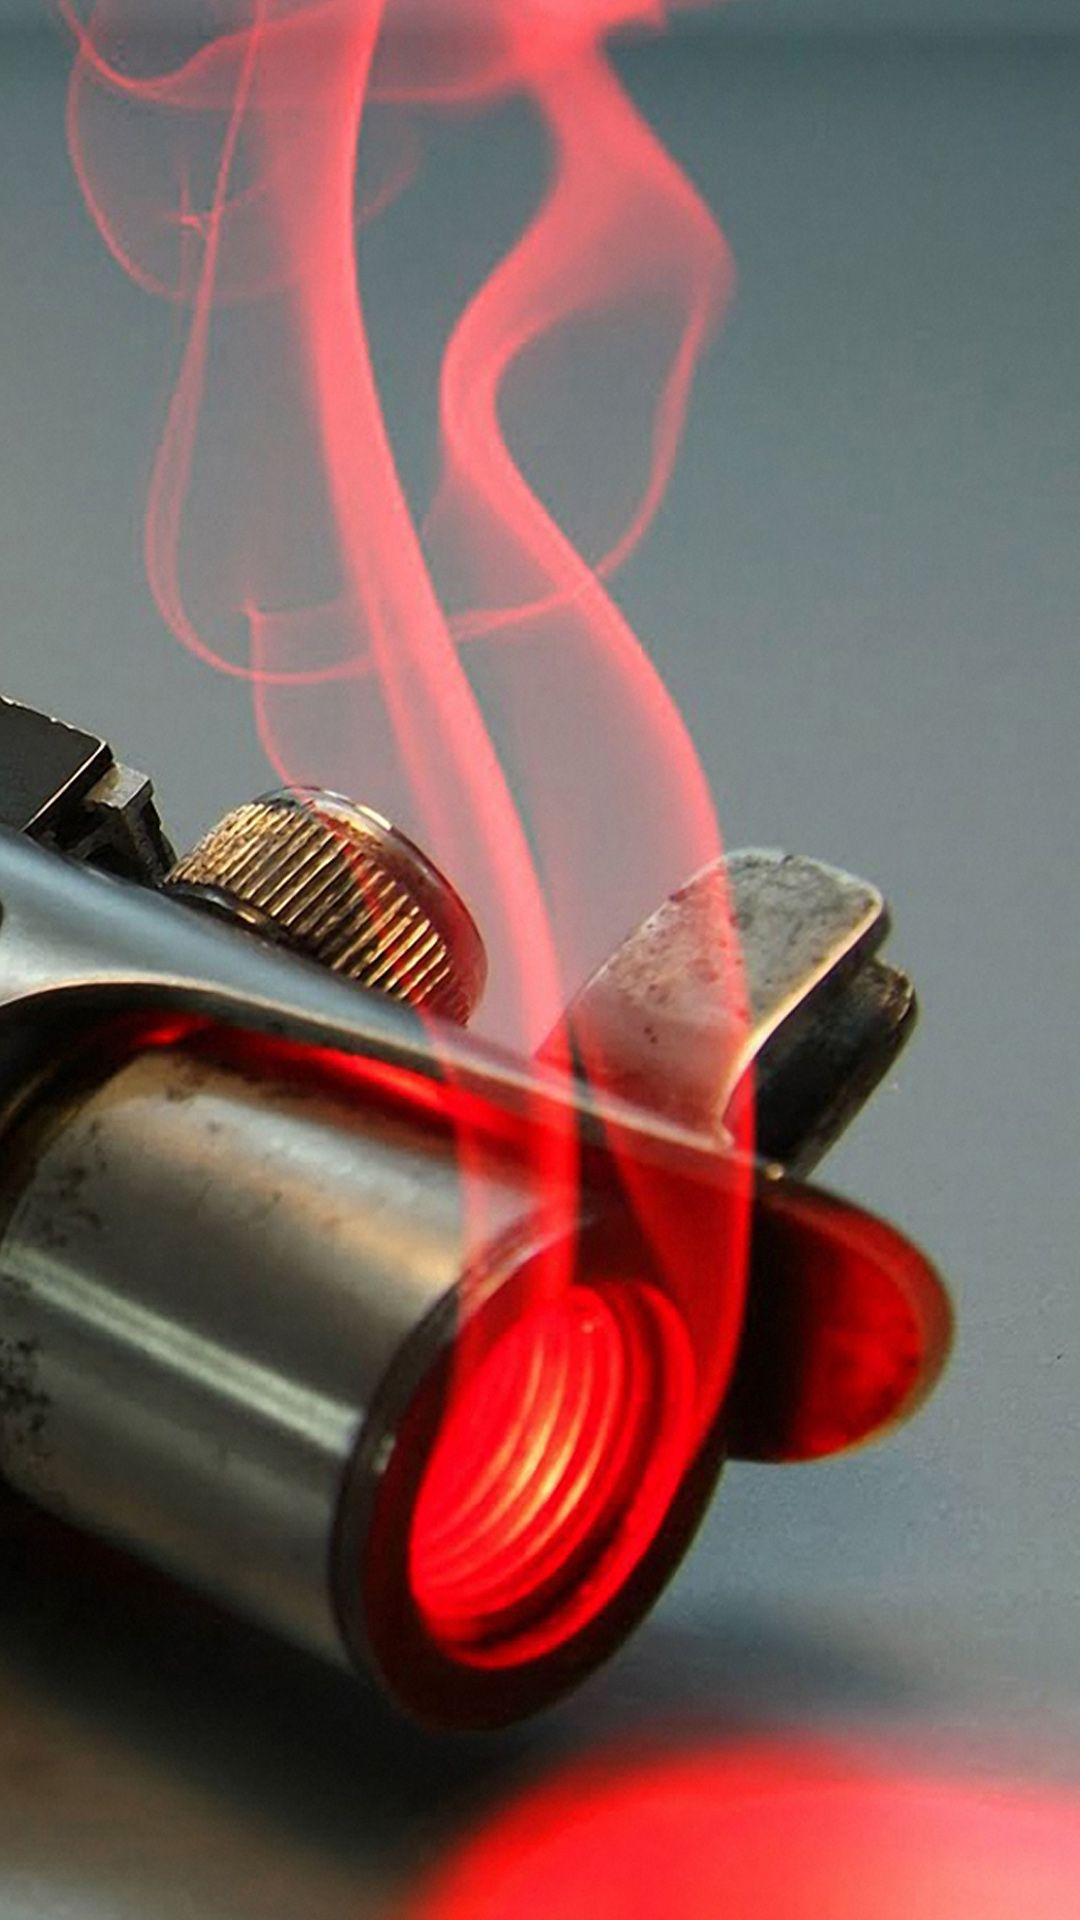 Red Smoking Gun htc one wallpaper, free and easy to